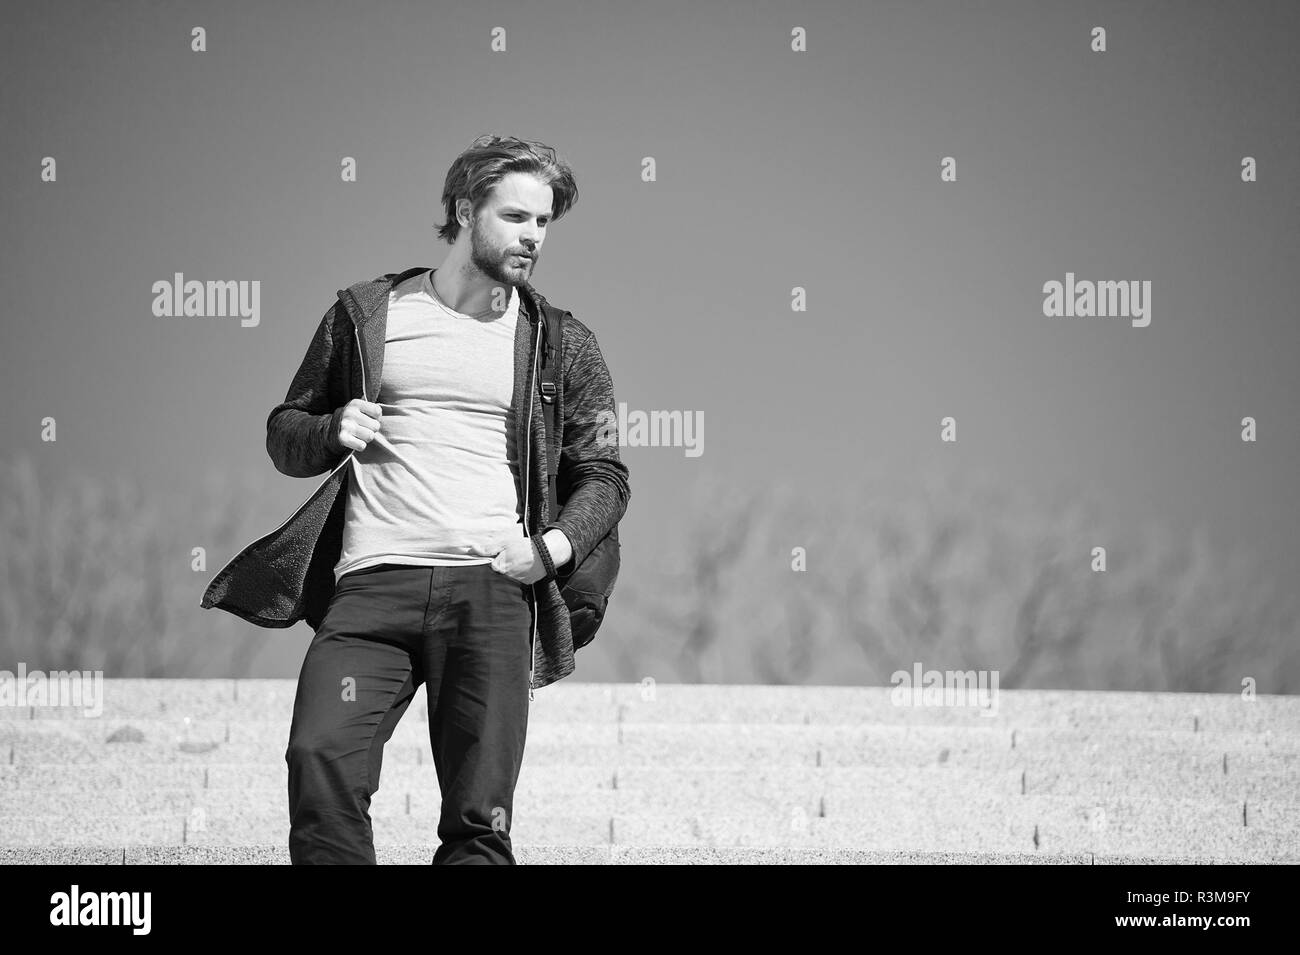 https://c8.alamy.com/comp/R3M9FY/one-more-step-man-handsome-guy-enjoy-morning-walk-blue-sky-background-copy-space-morning-fill-energy-charge-morning-brings-fresh-thoughts-man-thou-R3M9FY.jpg